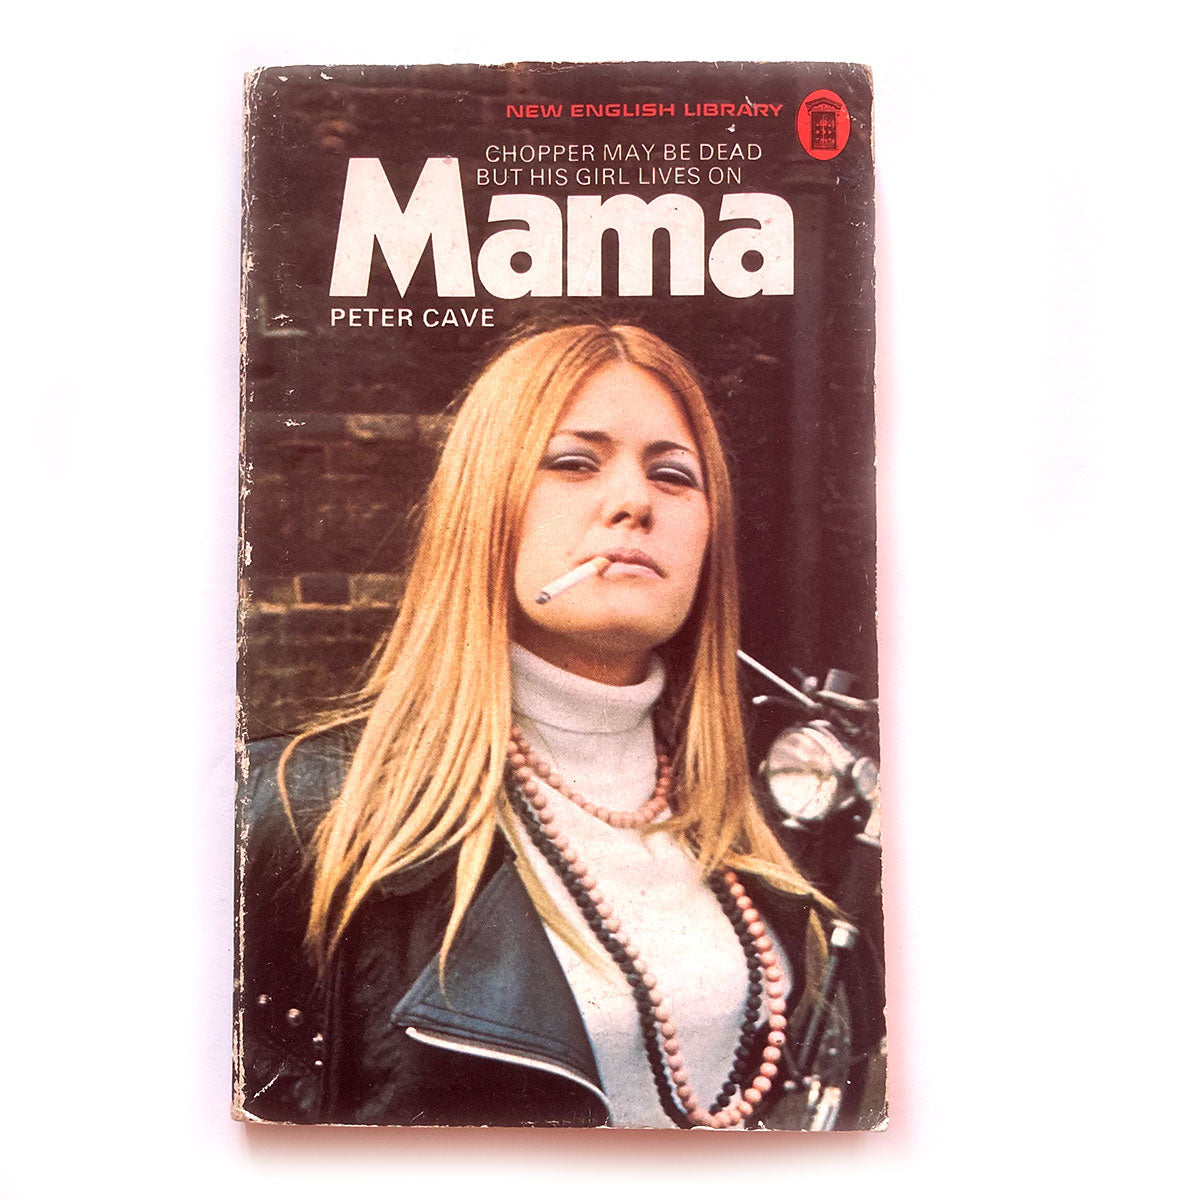 Mama by Peter Cave, New English Library paperback, 1974